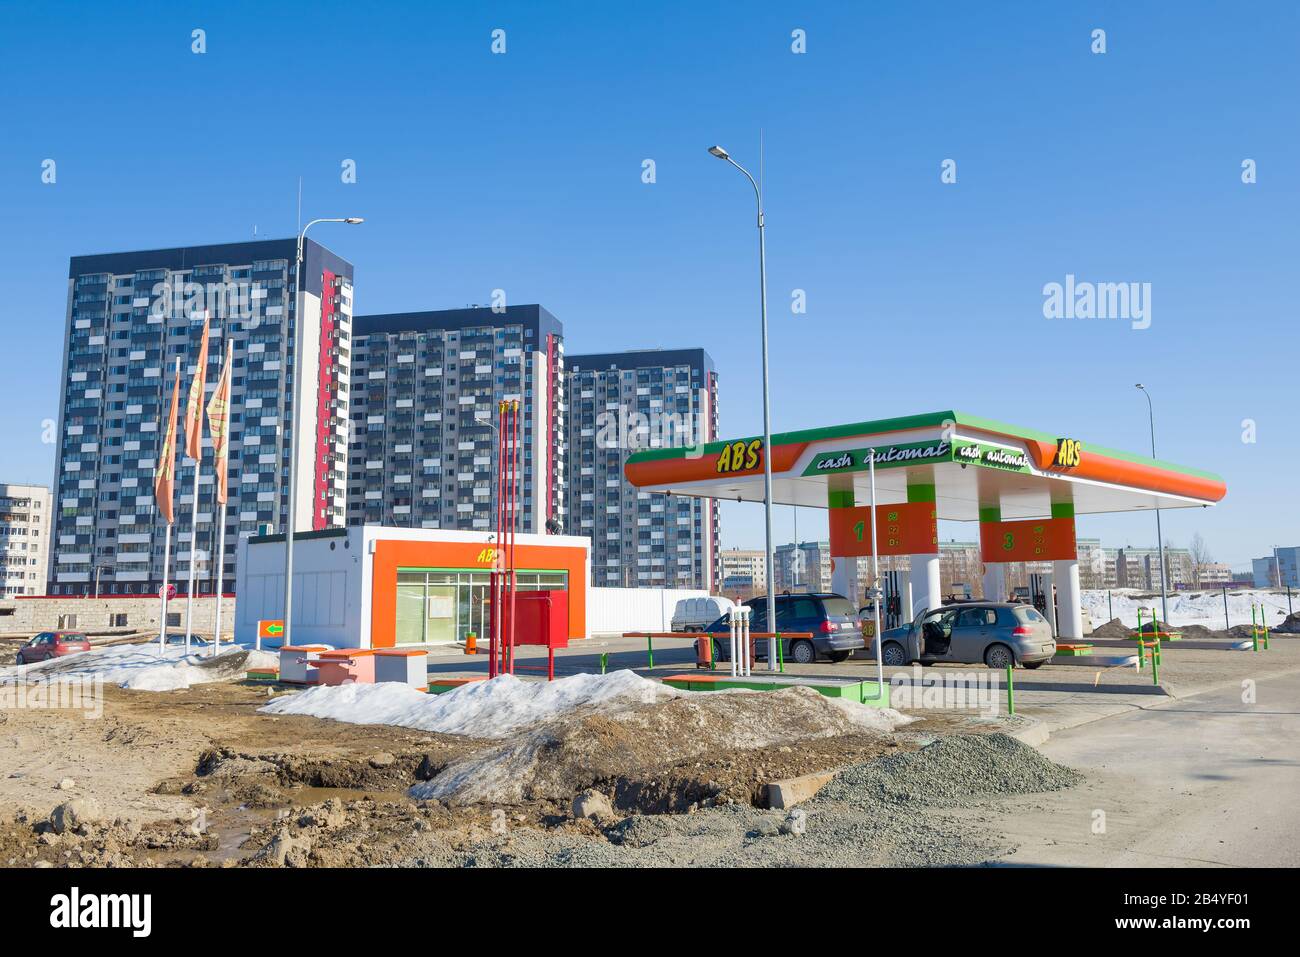 PETROZAVODSK, RUSSIA - APRIL 06, 2019: ABS auto fuel station on a sunny April day Stock Photo